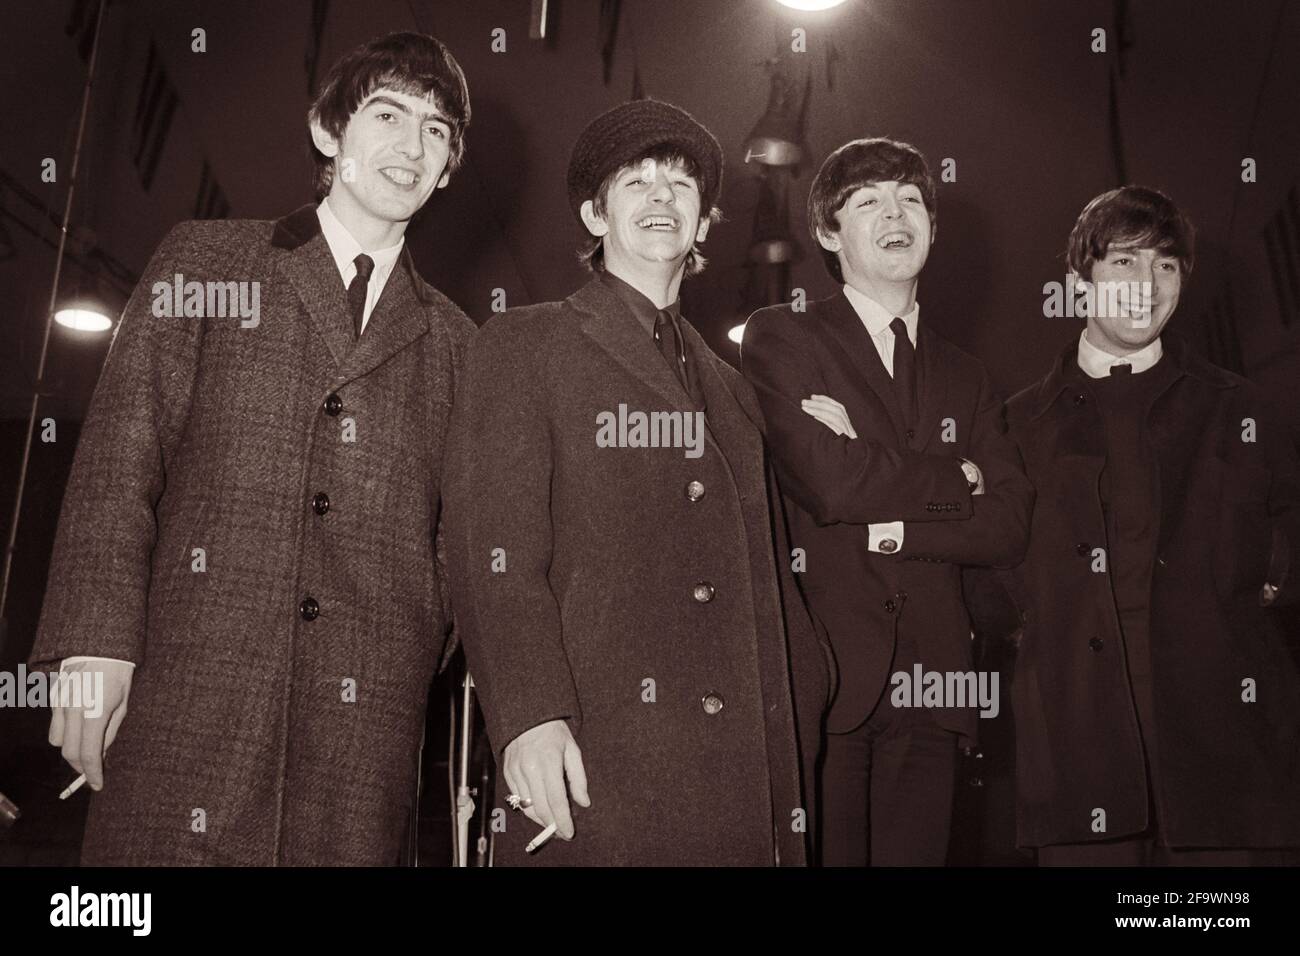 The Beatles at the Washington Coliseum on February 11, 1964, for their first concert in America, two days after their appearance on the Ed Sullivan Show. Pictured L to R are: George Harrison, Ringo Starr, Paul McCartney, and John Lennon. (USA) Stock Photo